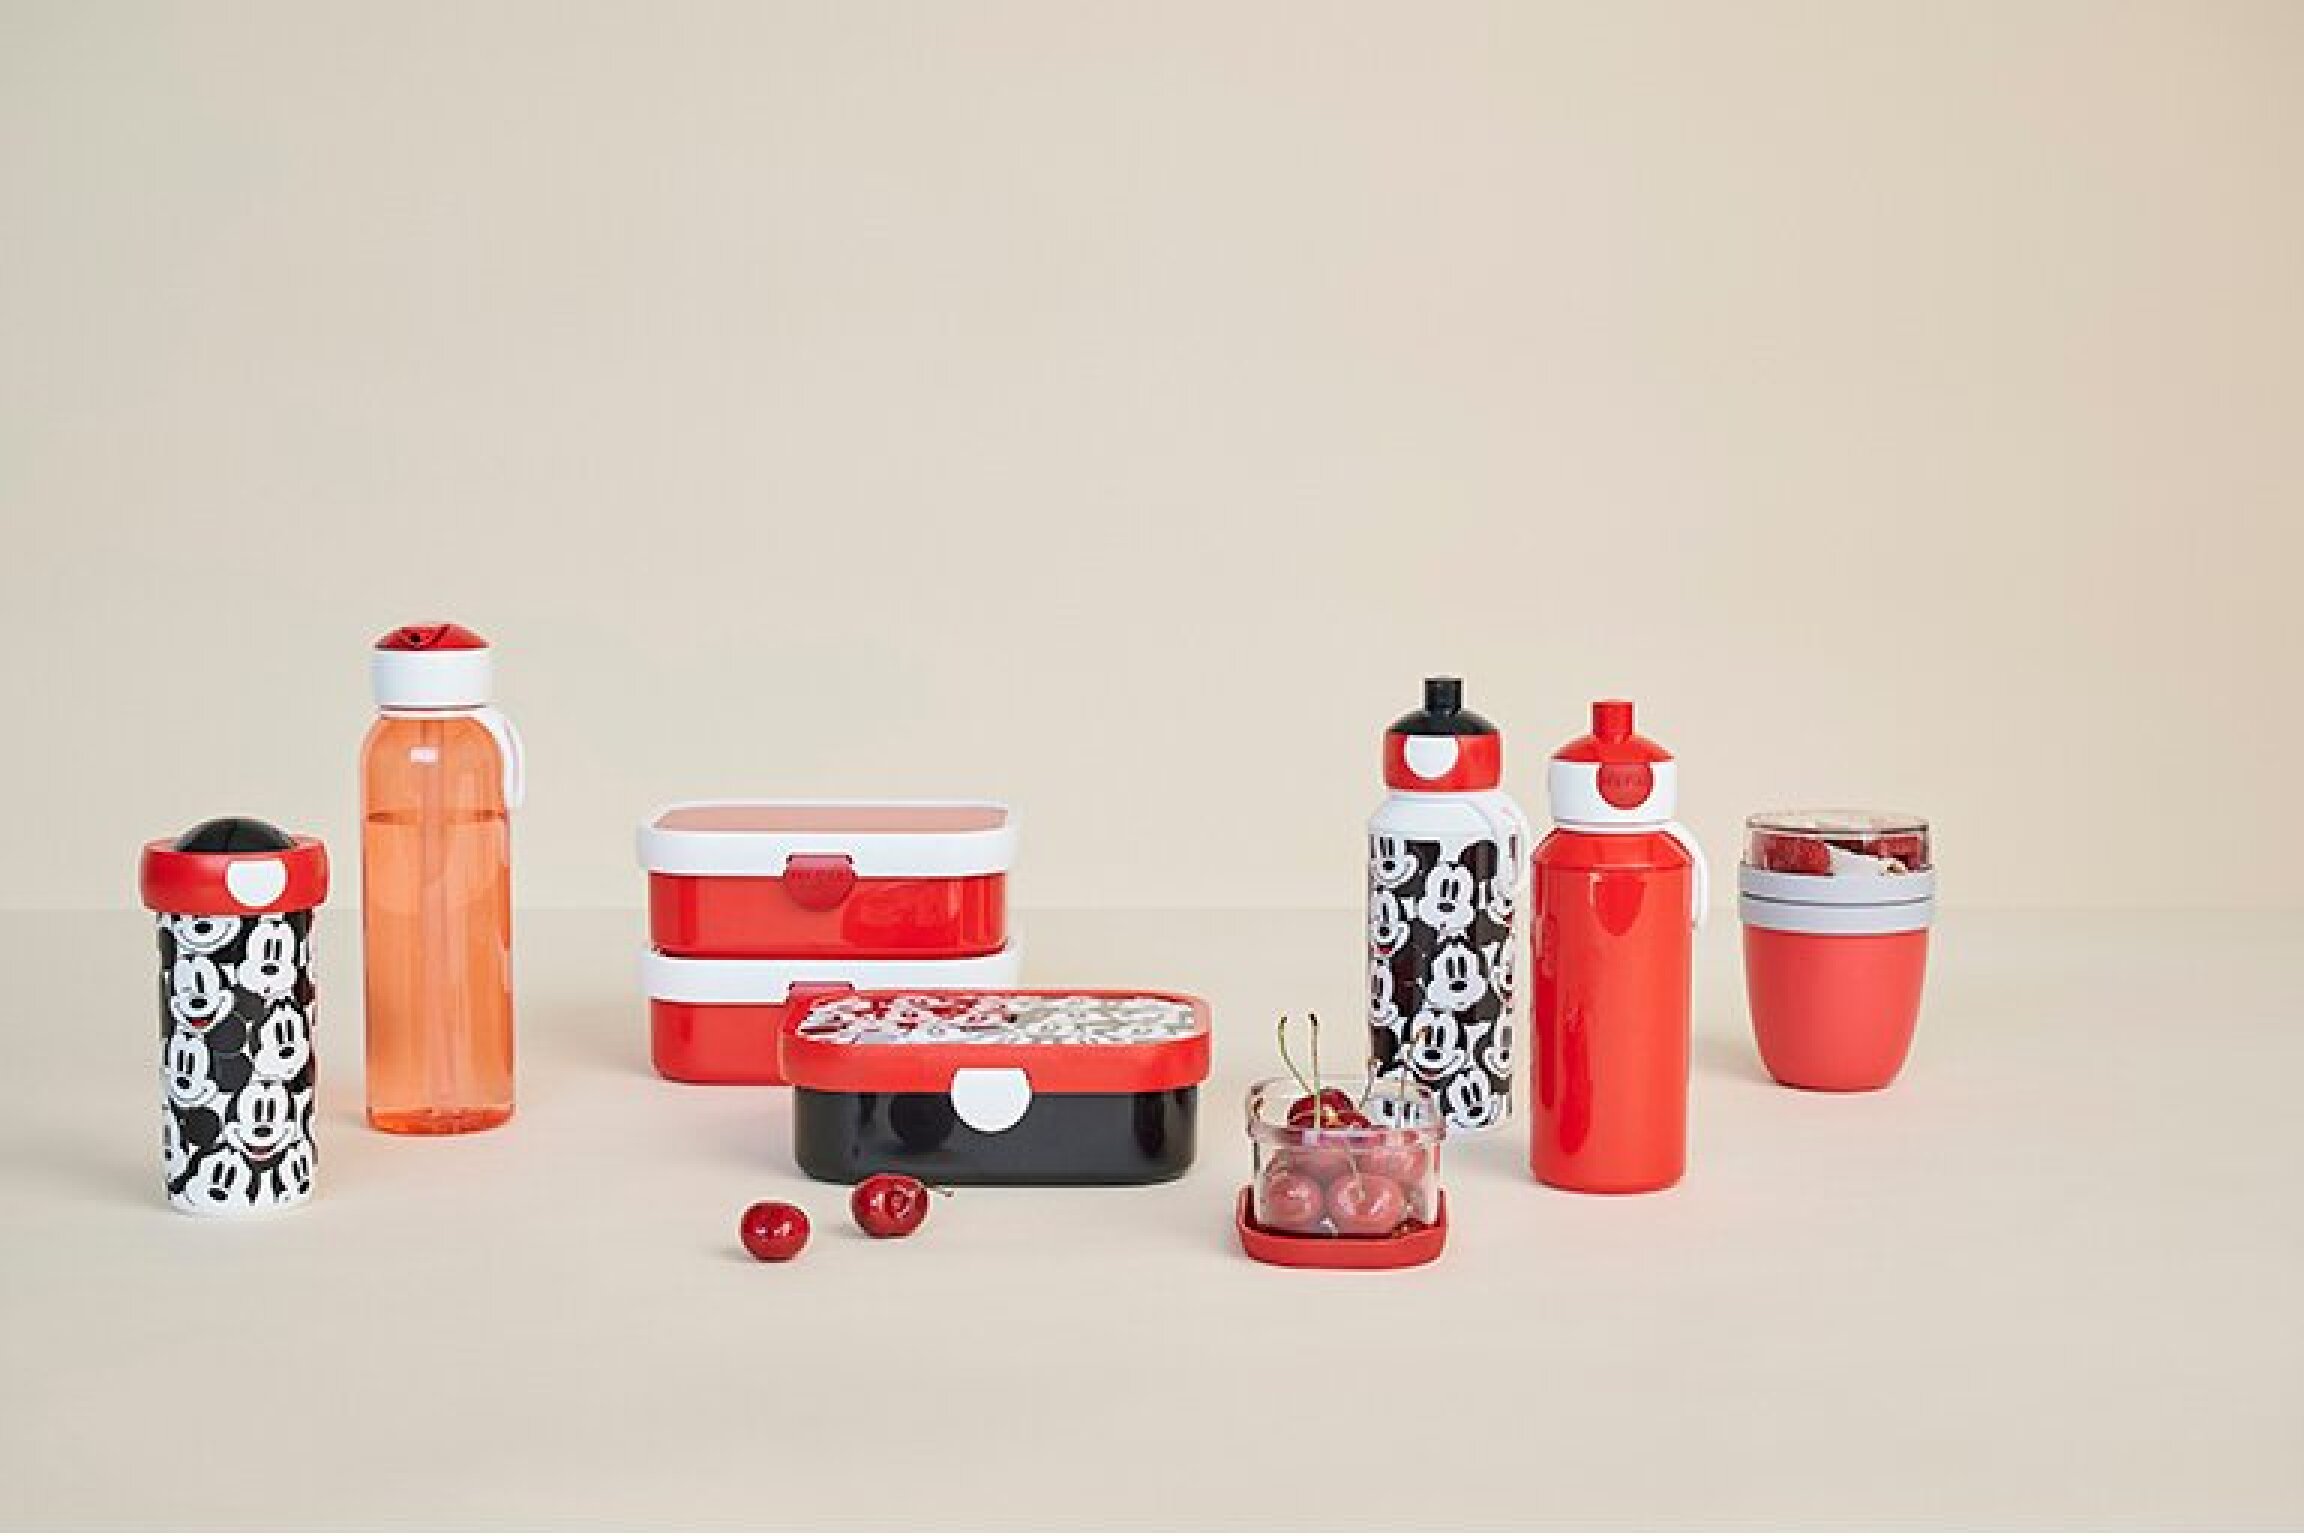 Lunchset Campus (pop-up + lunchbox) - Space